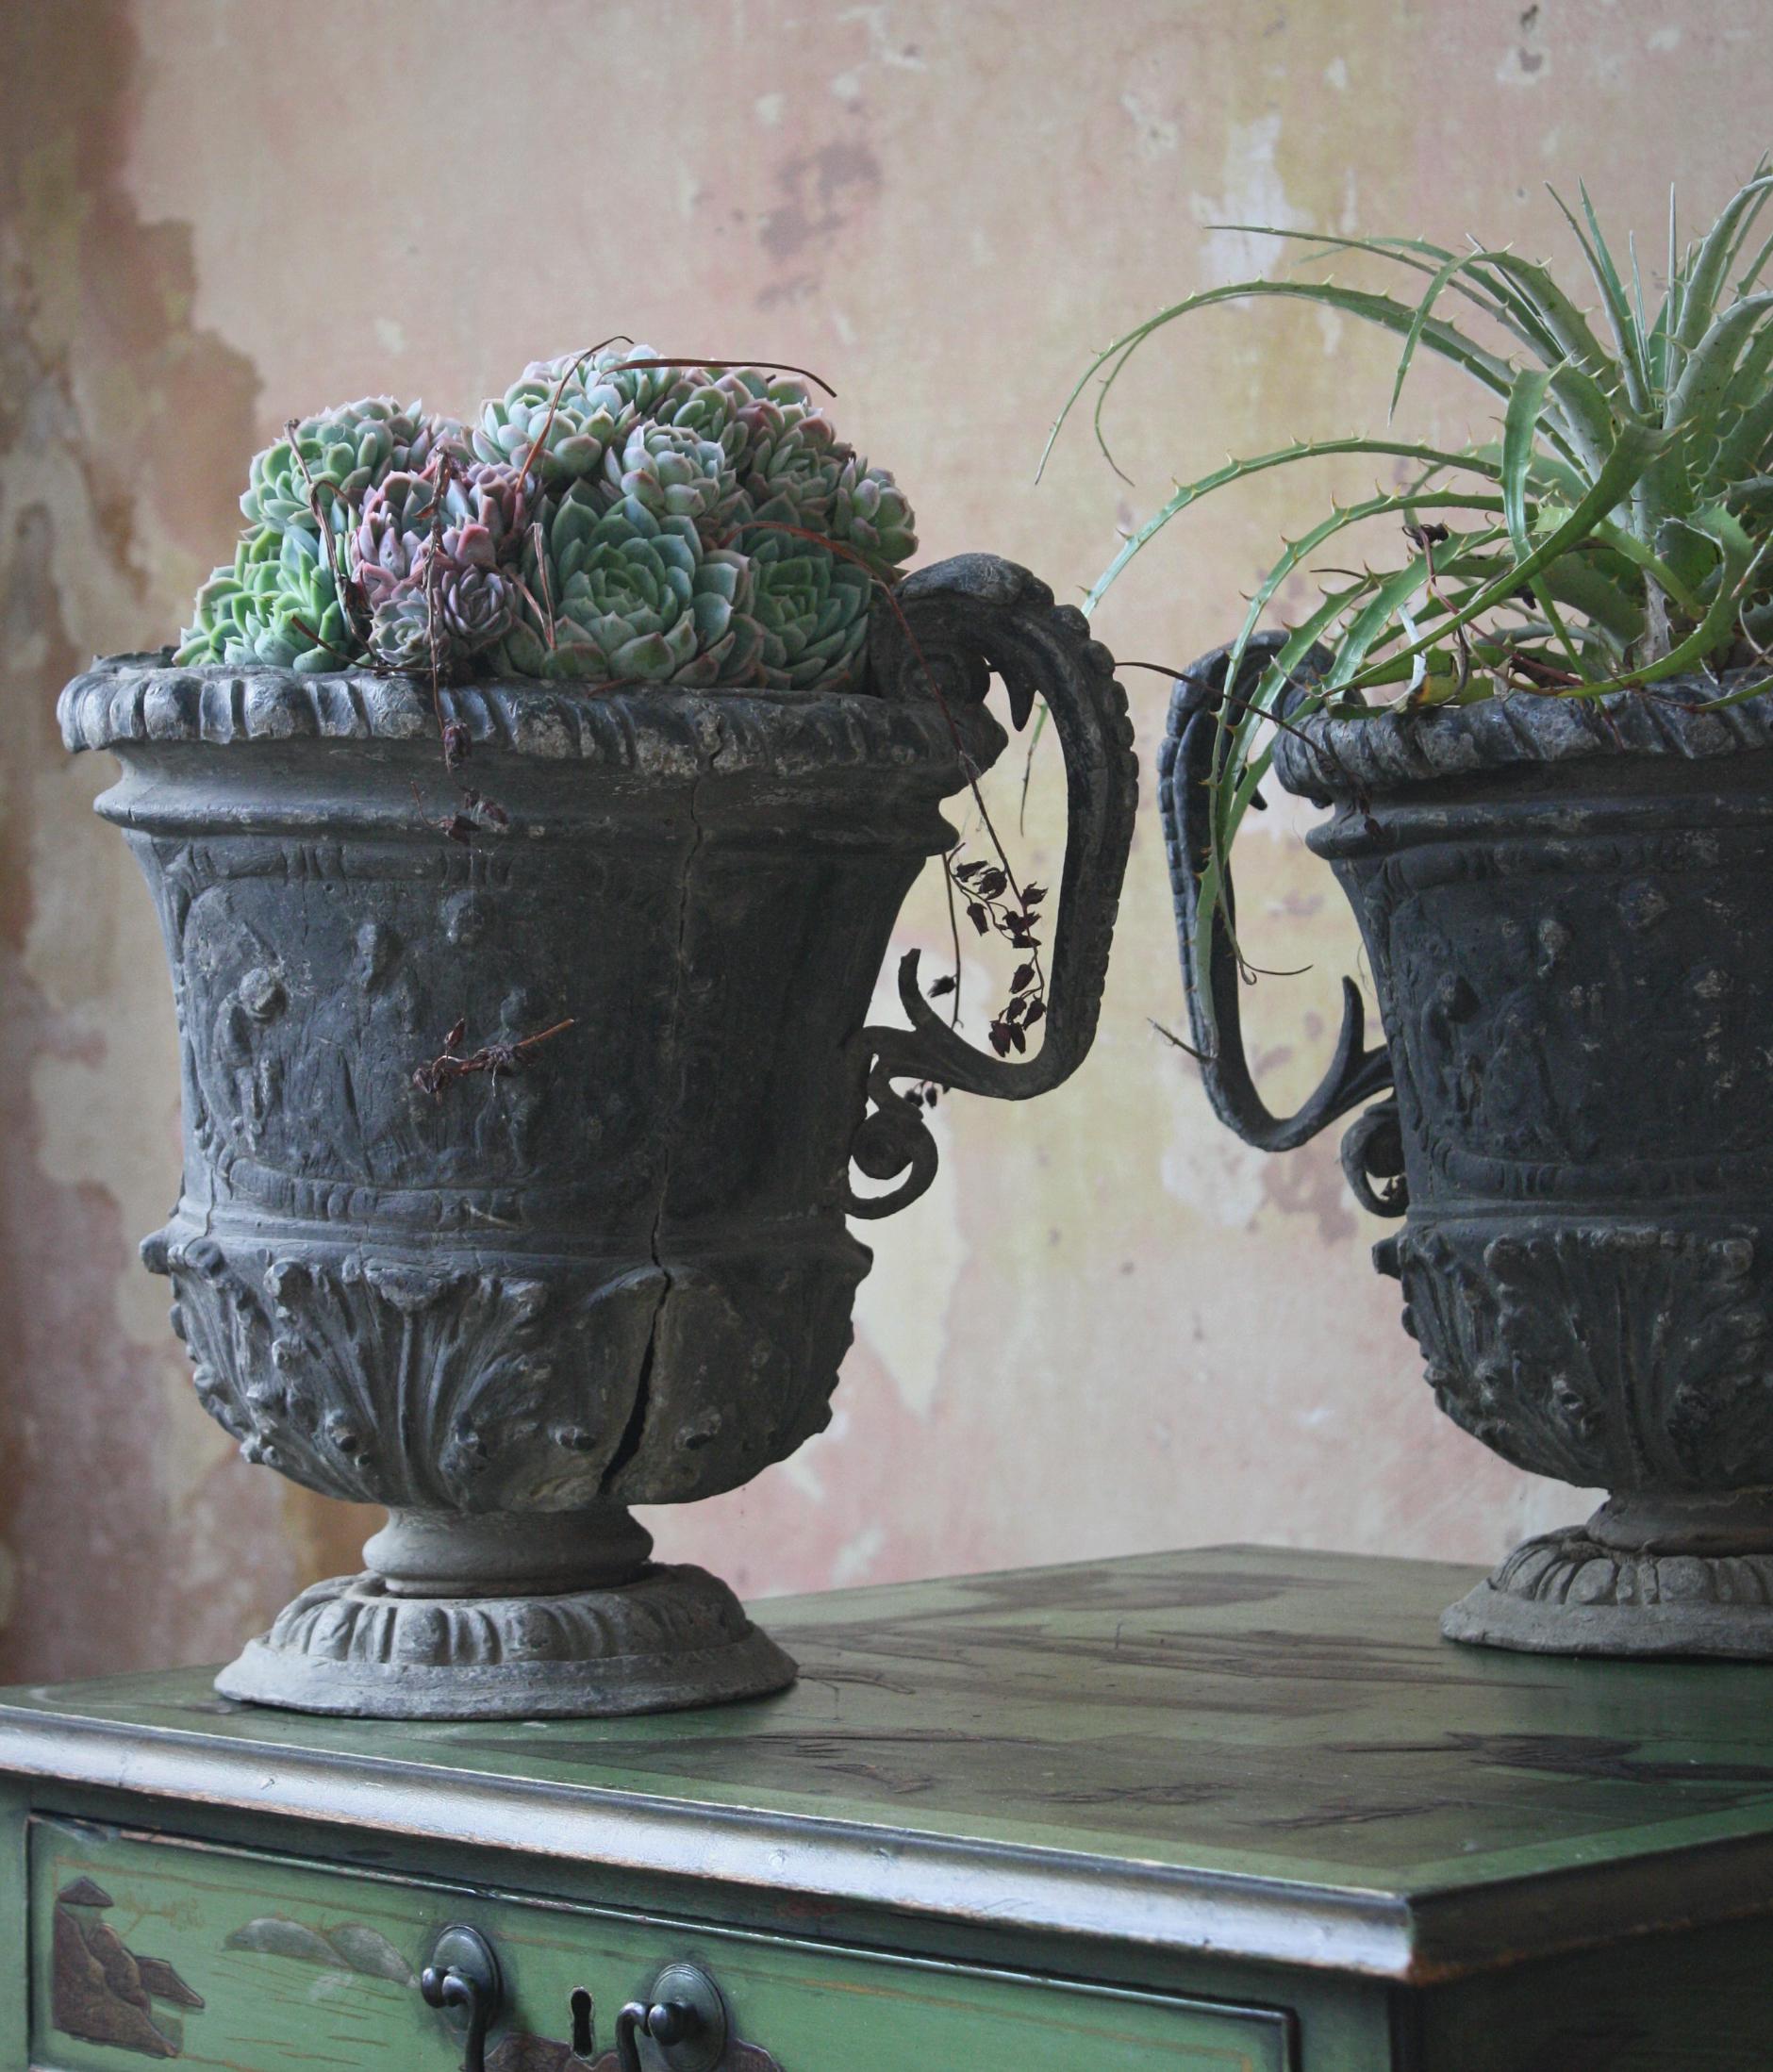 A highly decorative matching pair of English lead urns in the 18th century style.

Typical scrolled handles and gadrooned bases, classical figures adore the central body of each urn.

Some sagging and minor splitting as one would expect due to